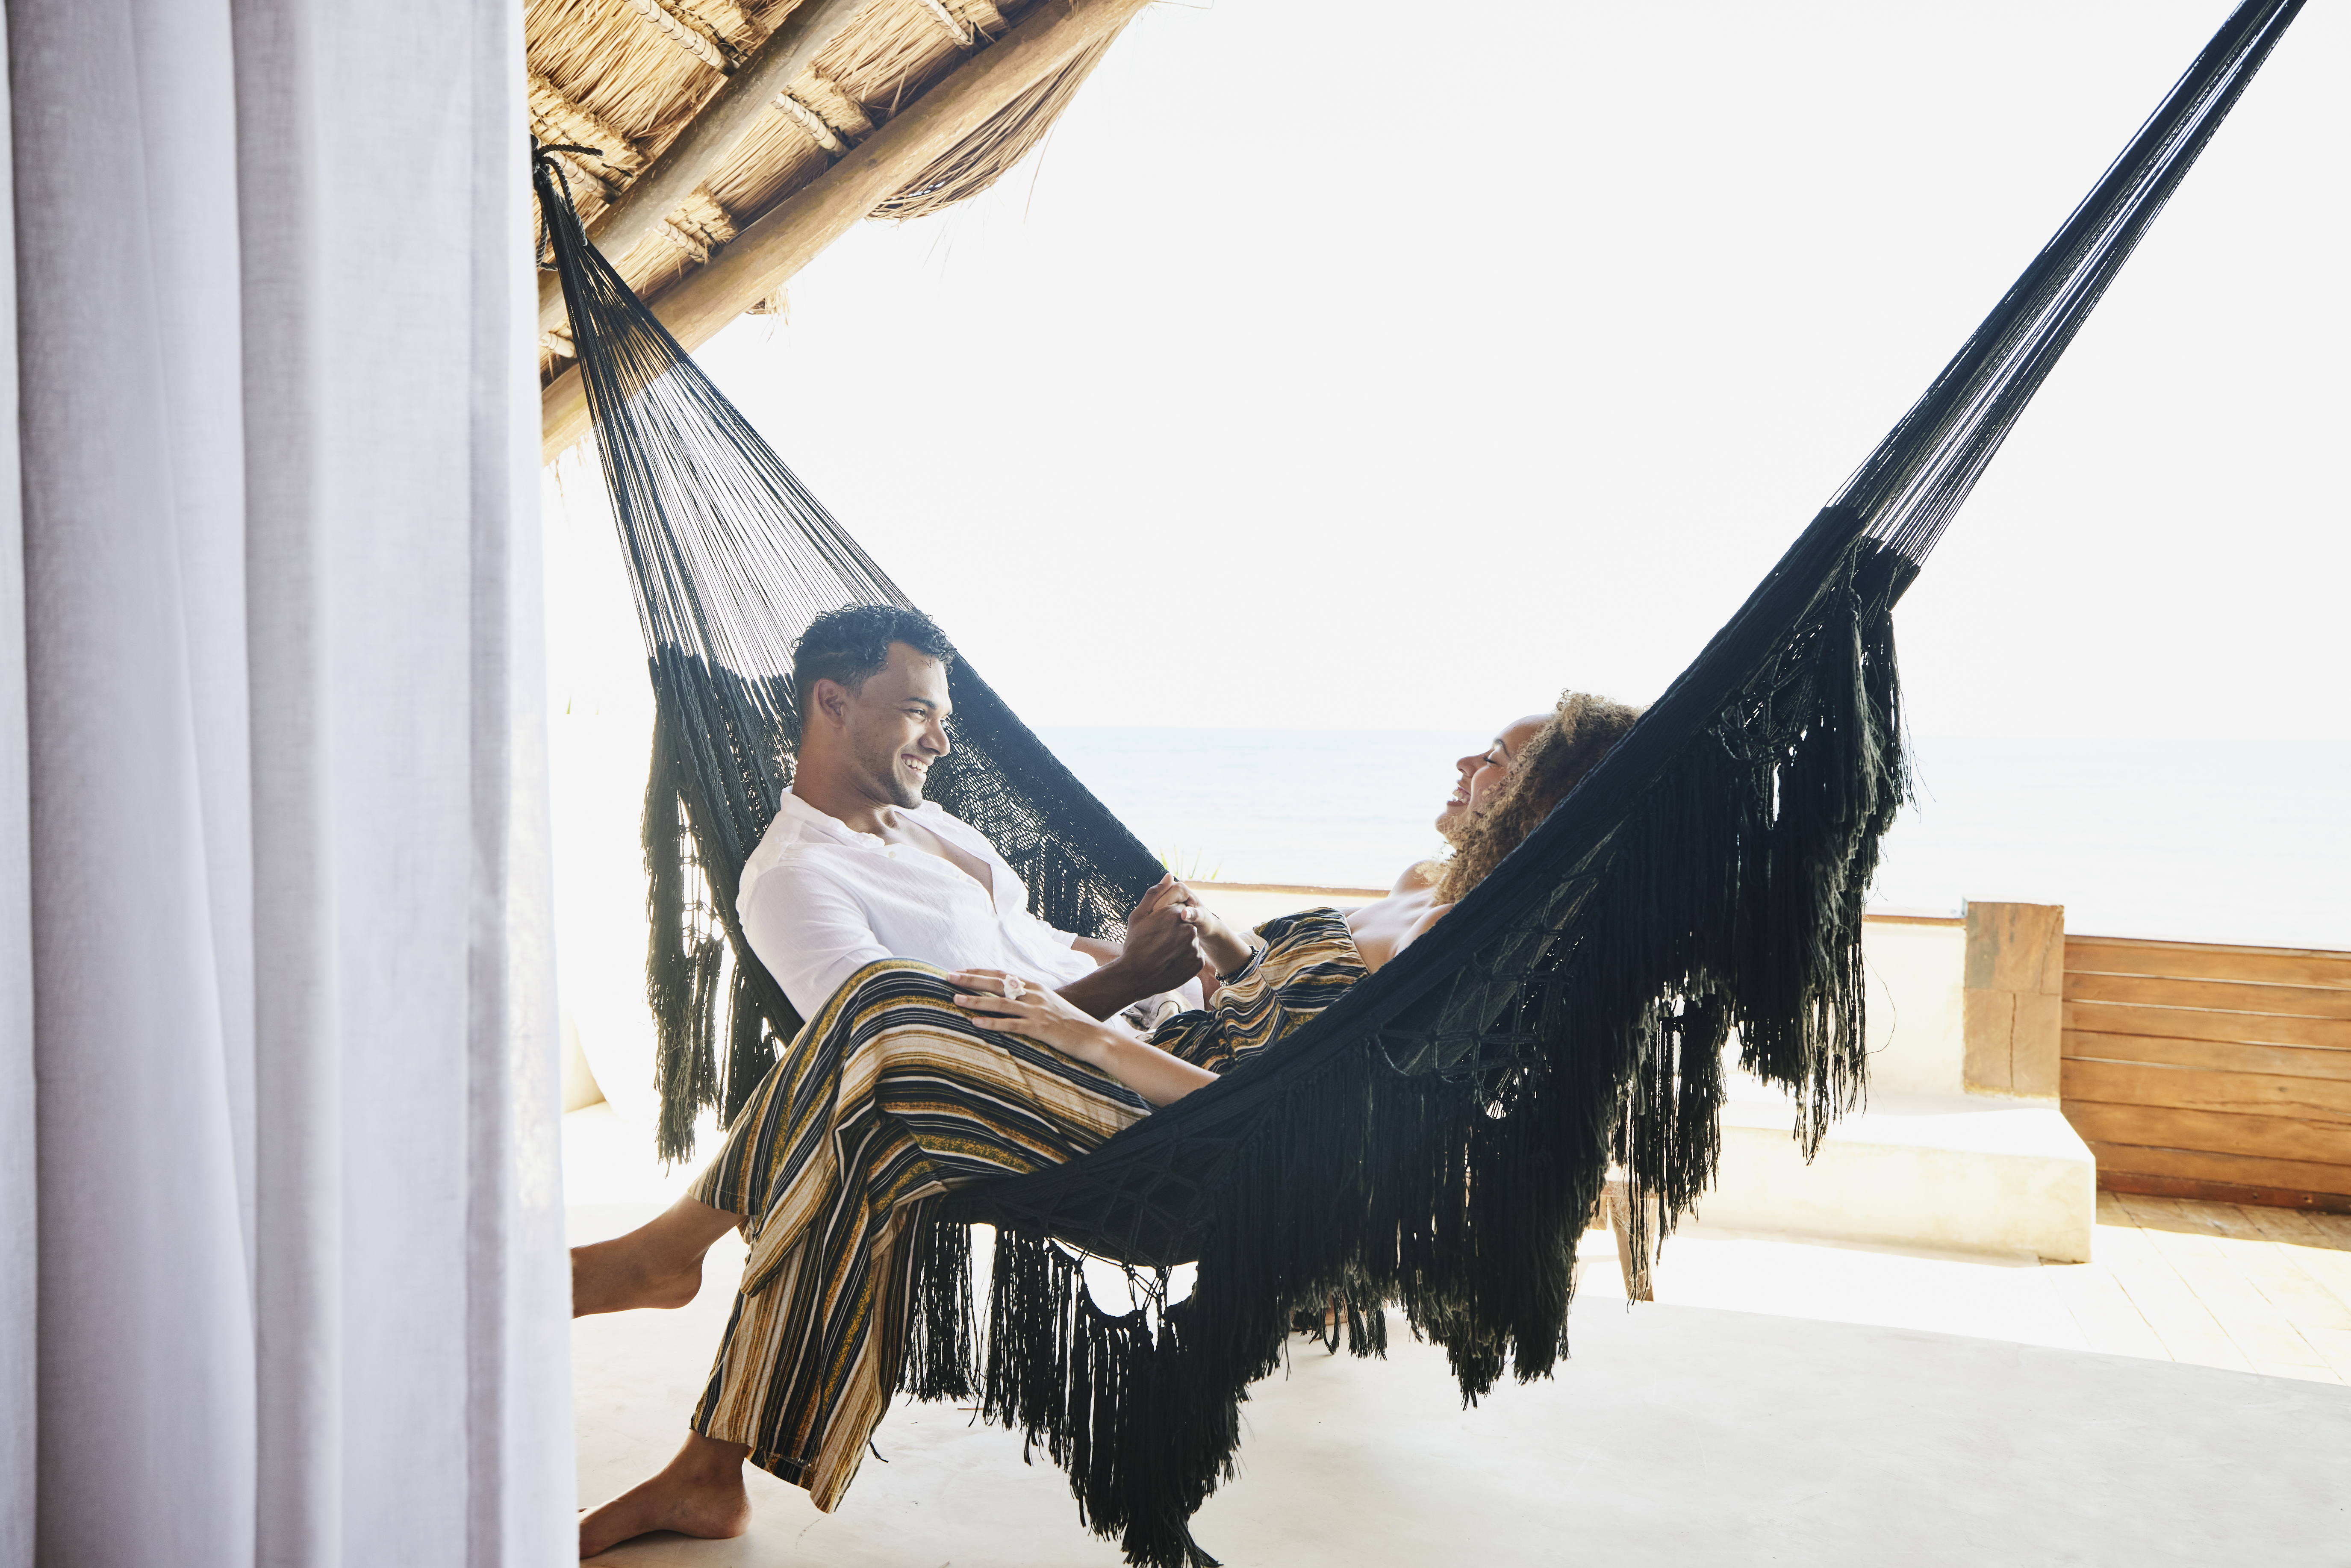 A couple enjoying their vaction while spending quality time on a hammock | Source: Getty Images